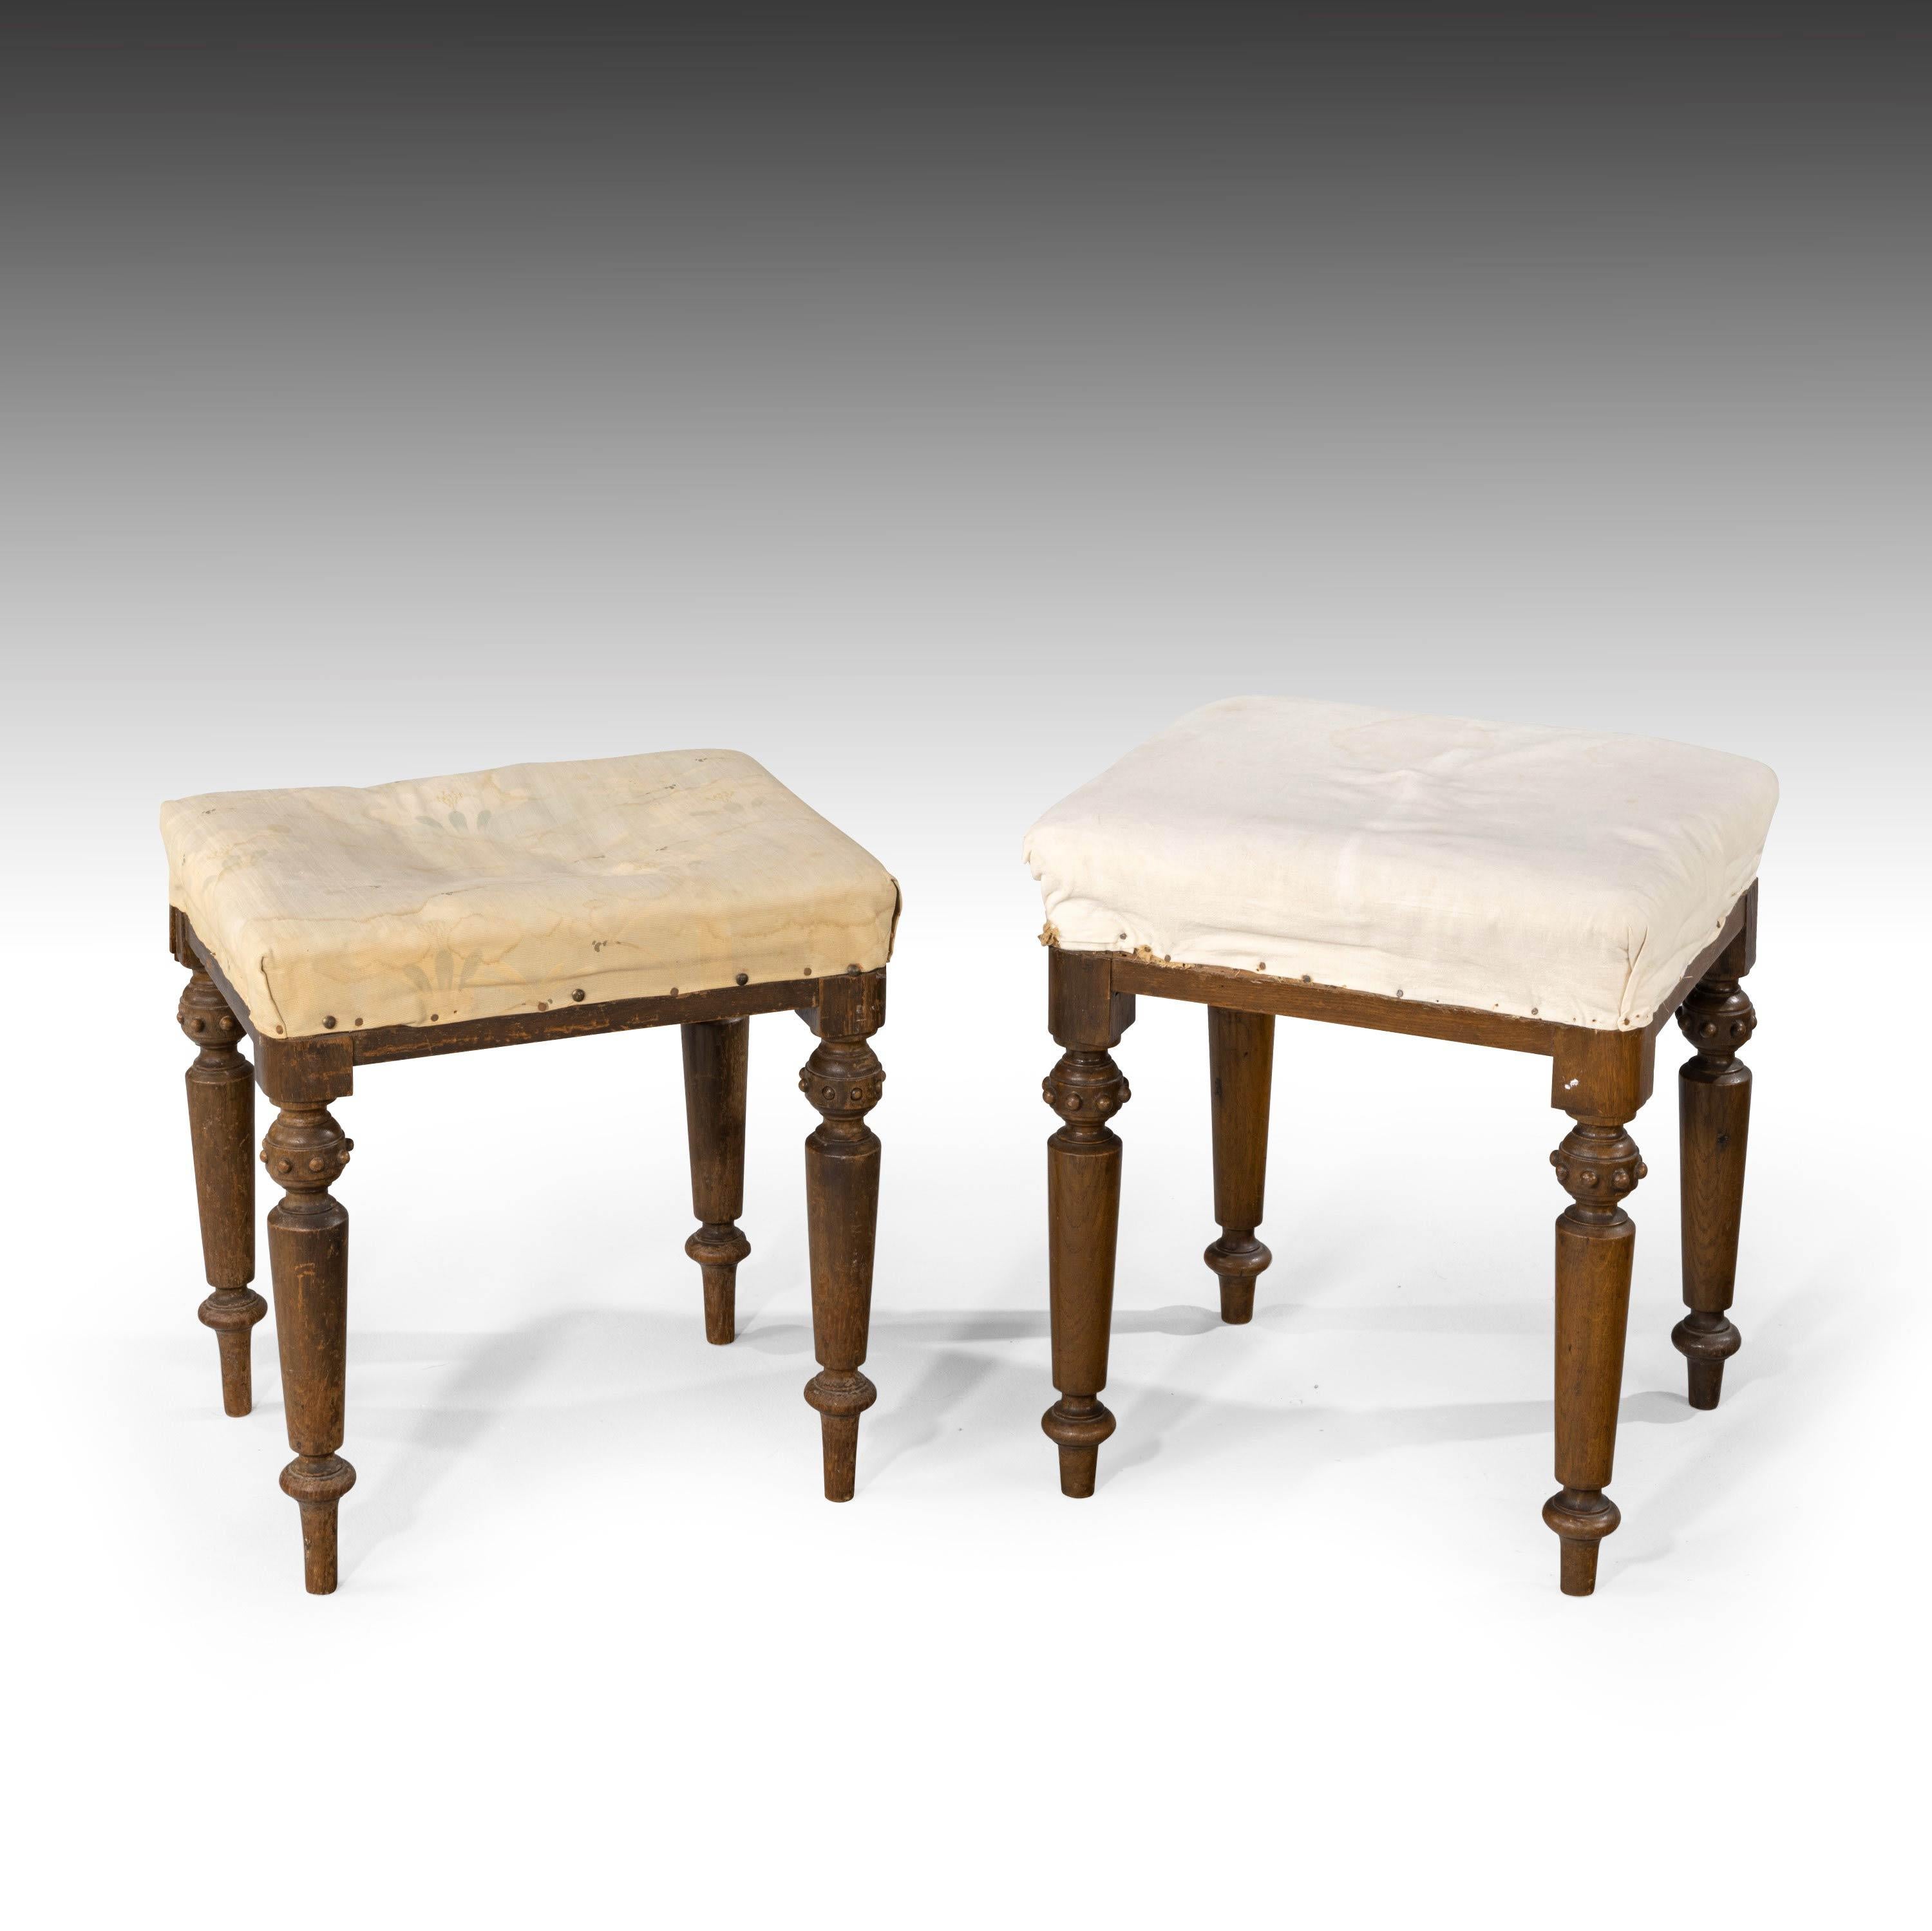 English A Matched Pair of Early Victorian Mahogany Framed Stools